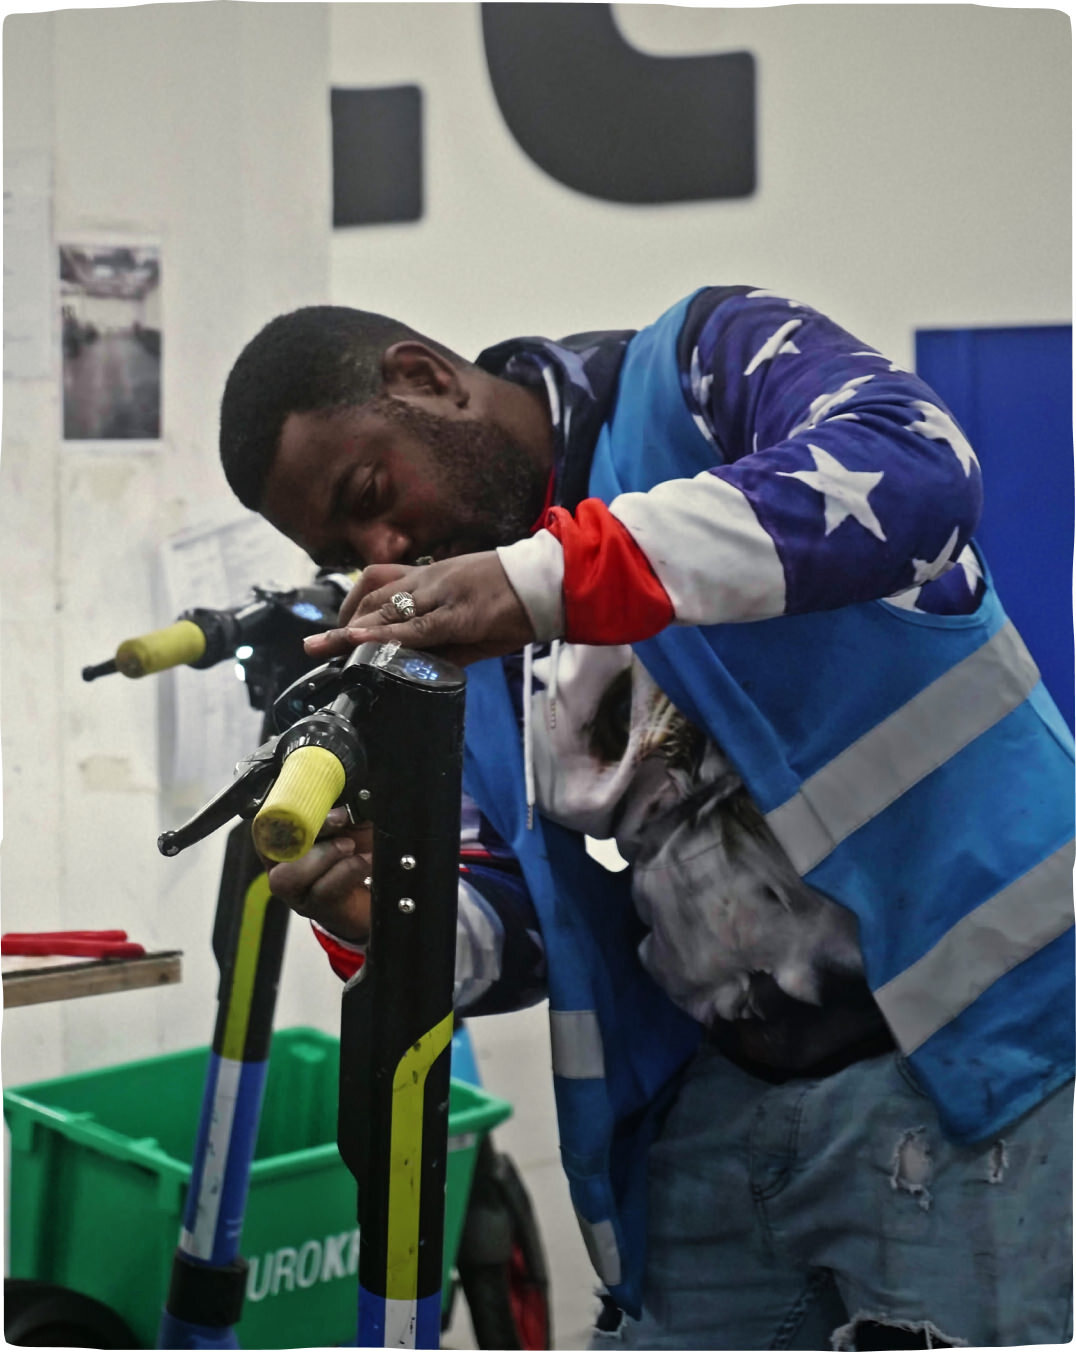 A man at a Dott warehouse workstation fixing parts of a scooter to ensure safe rides for all.